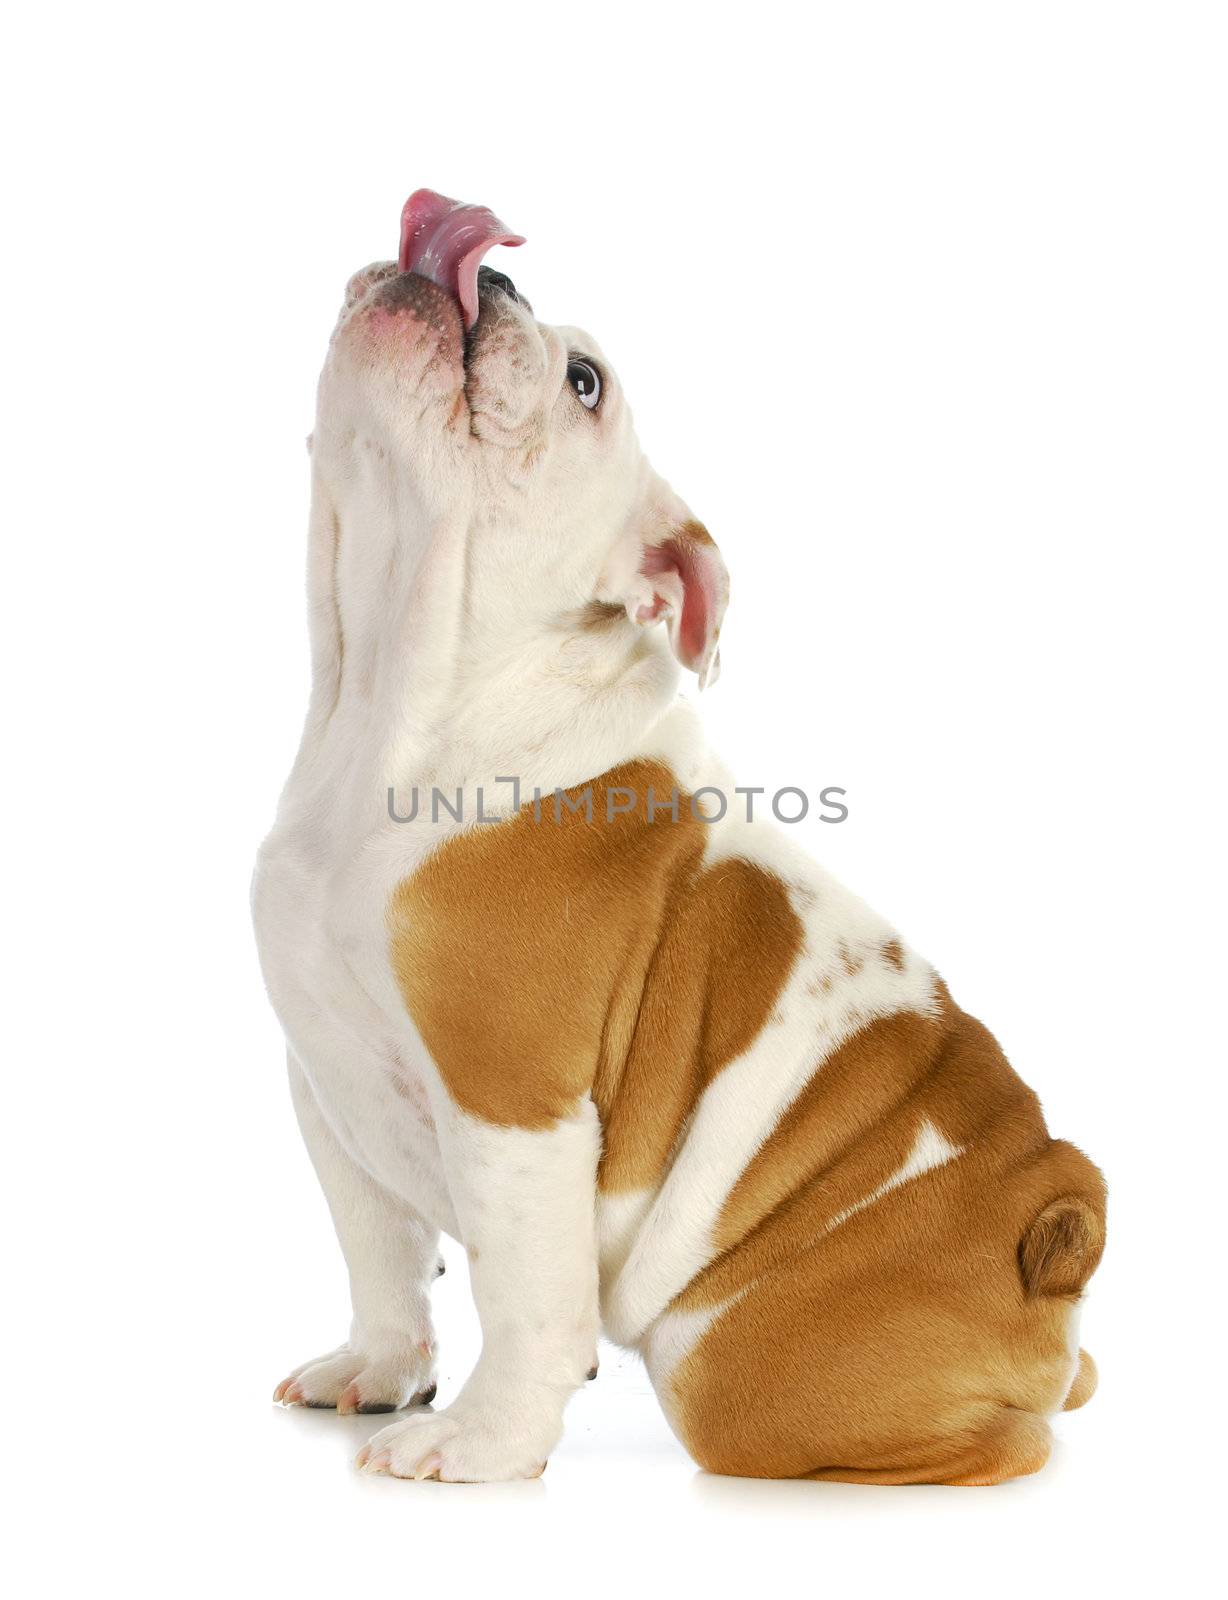 puppy looking up - english bulldog licking lips - 4.5 months old